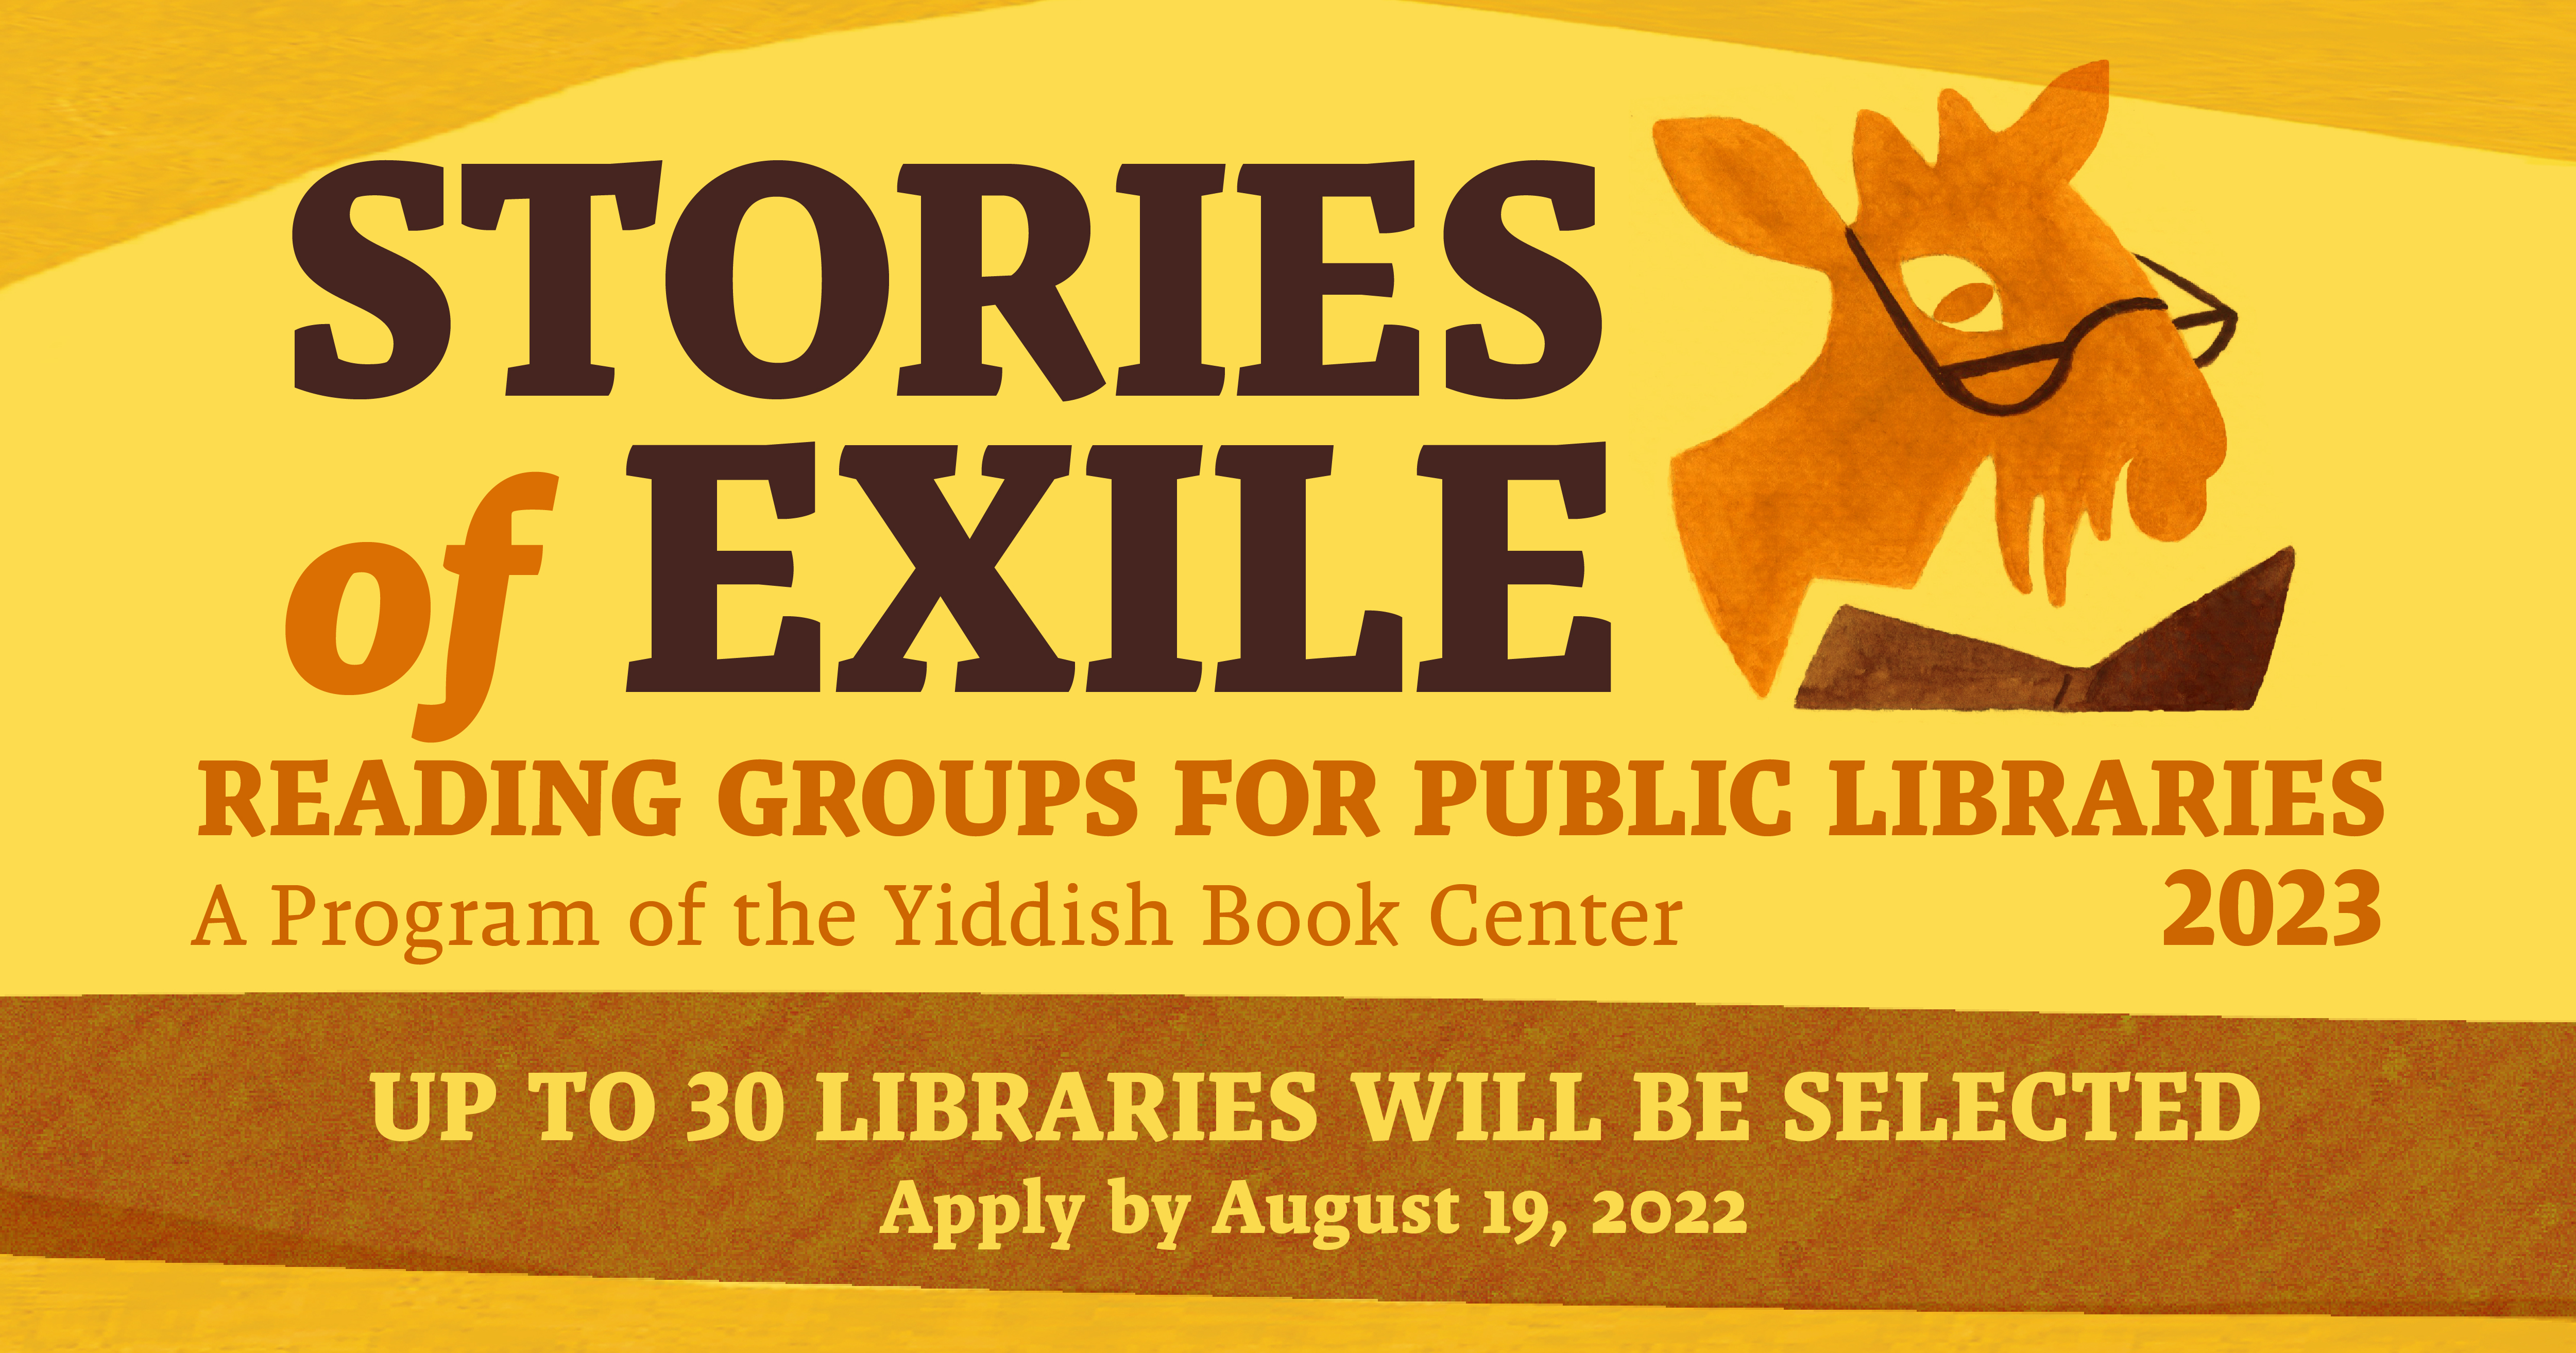 Image text reads: "Stories of Exile" Reading Groups for Public Libraries" A program of the Yiddish Book Center. Up to 30 libraries will be selected. Apply by August 19, 2022.